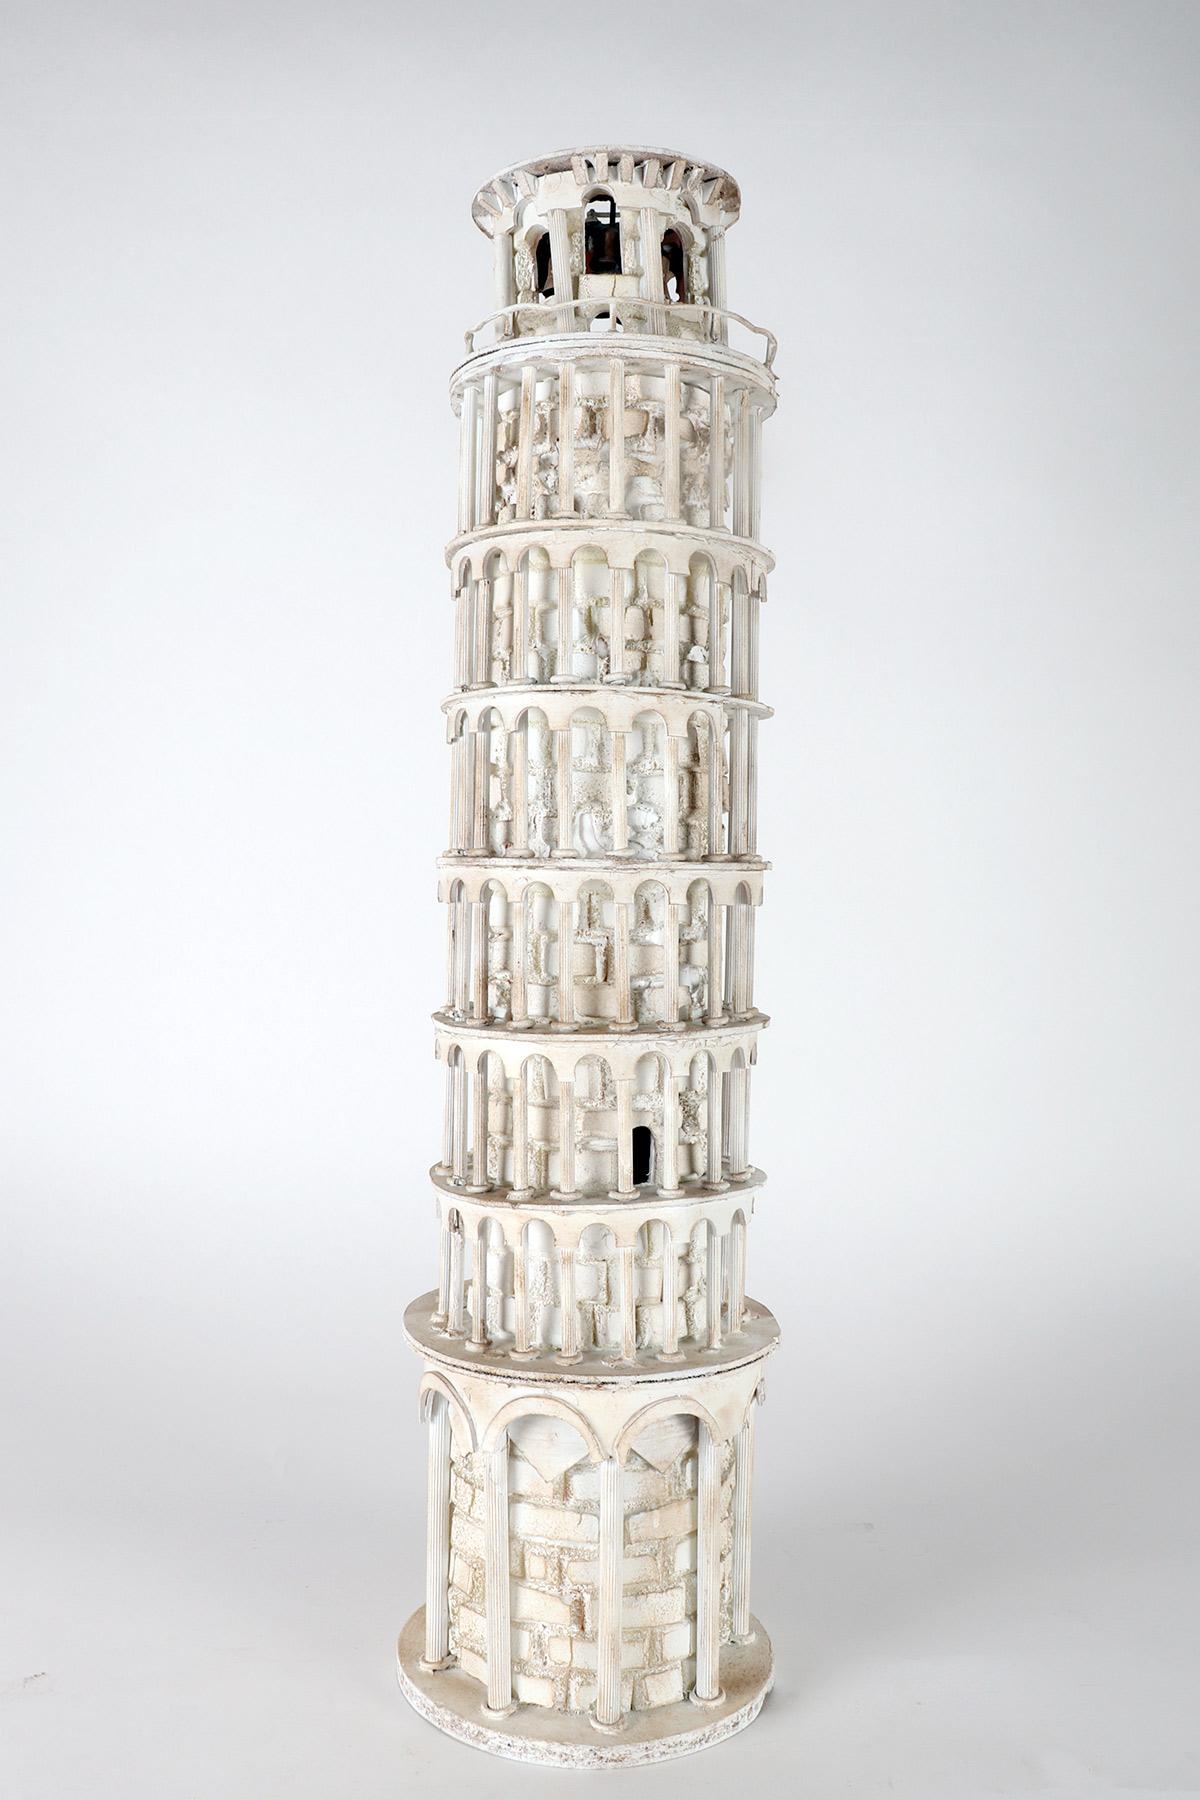 A Grand Tour wooden maquette, depicting the Tower of Pisa, Italy 1950. For Sale 1